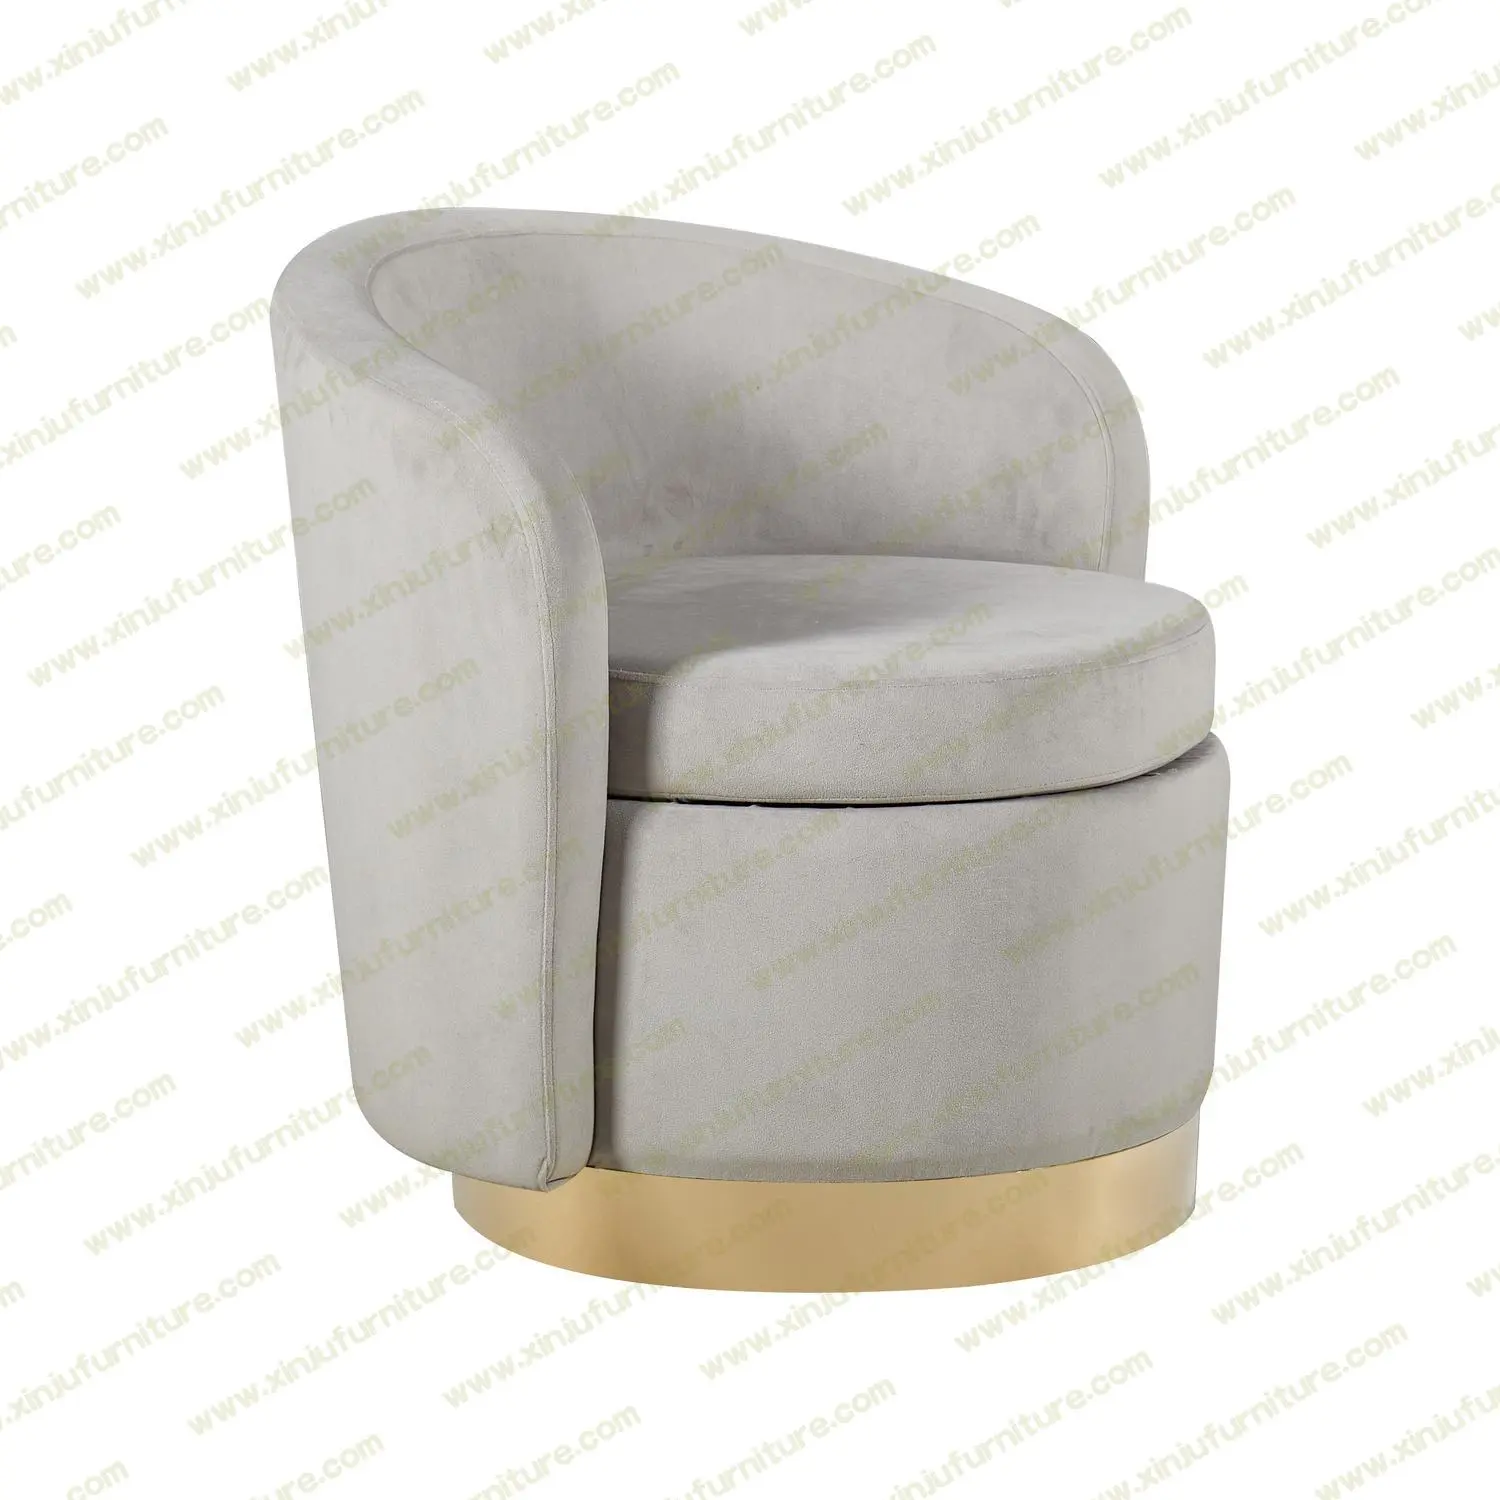 Durable and beautiful Ottoman chair gray